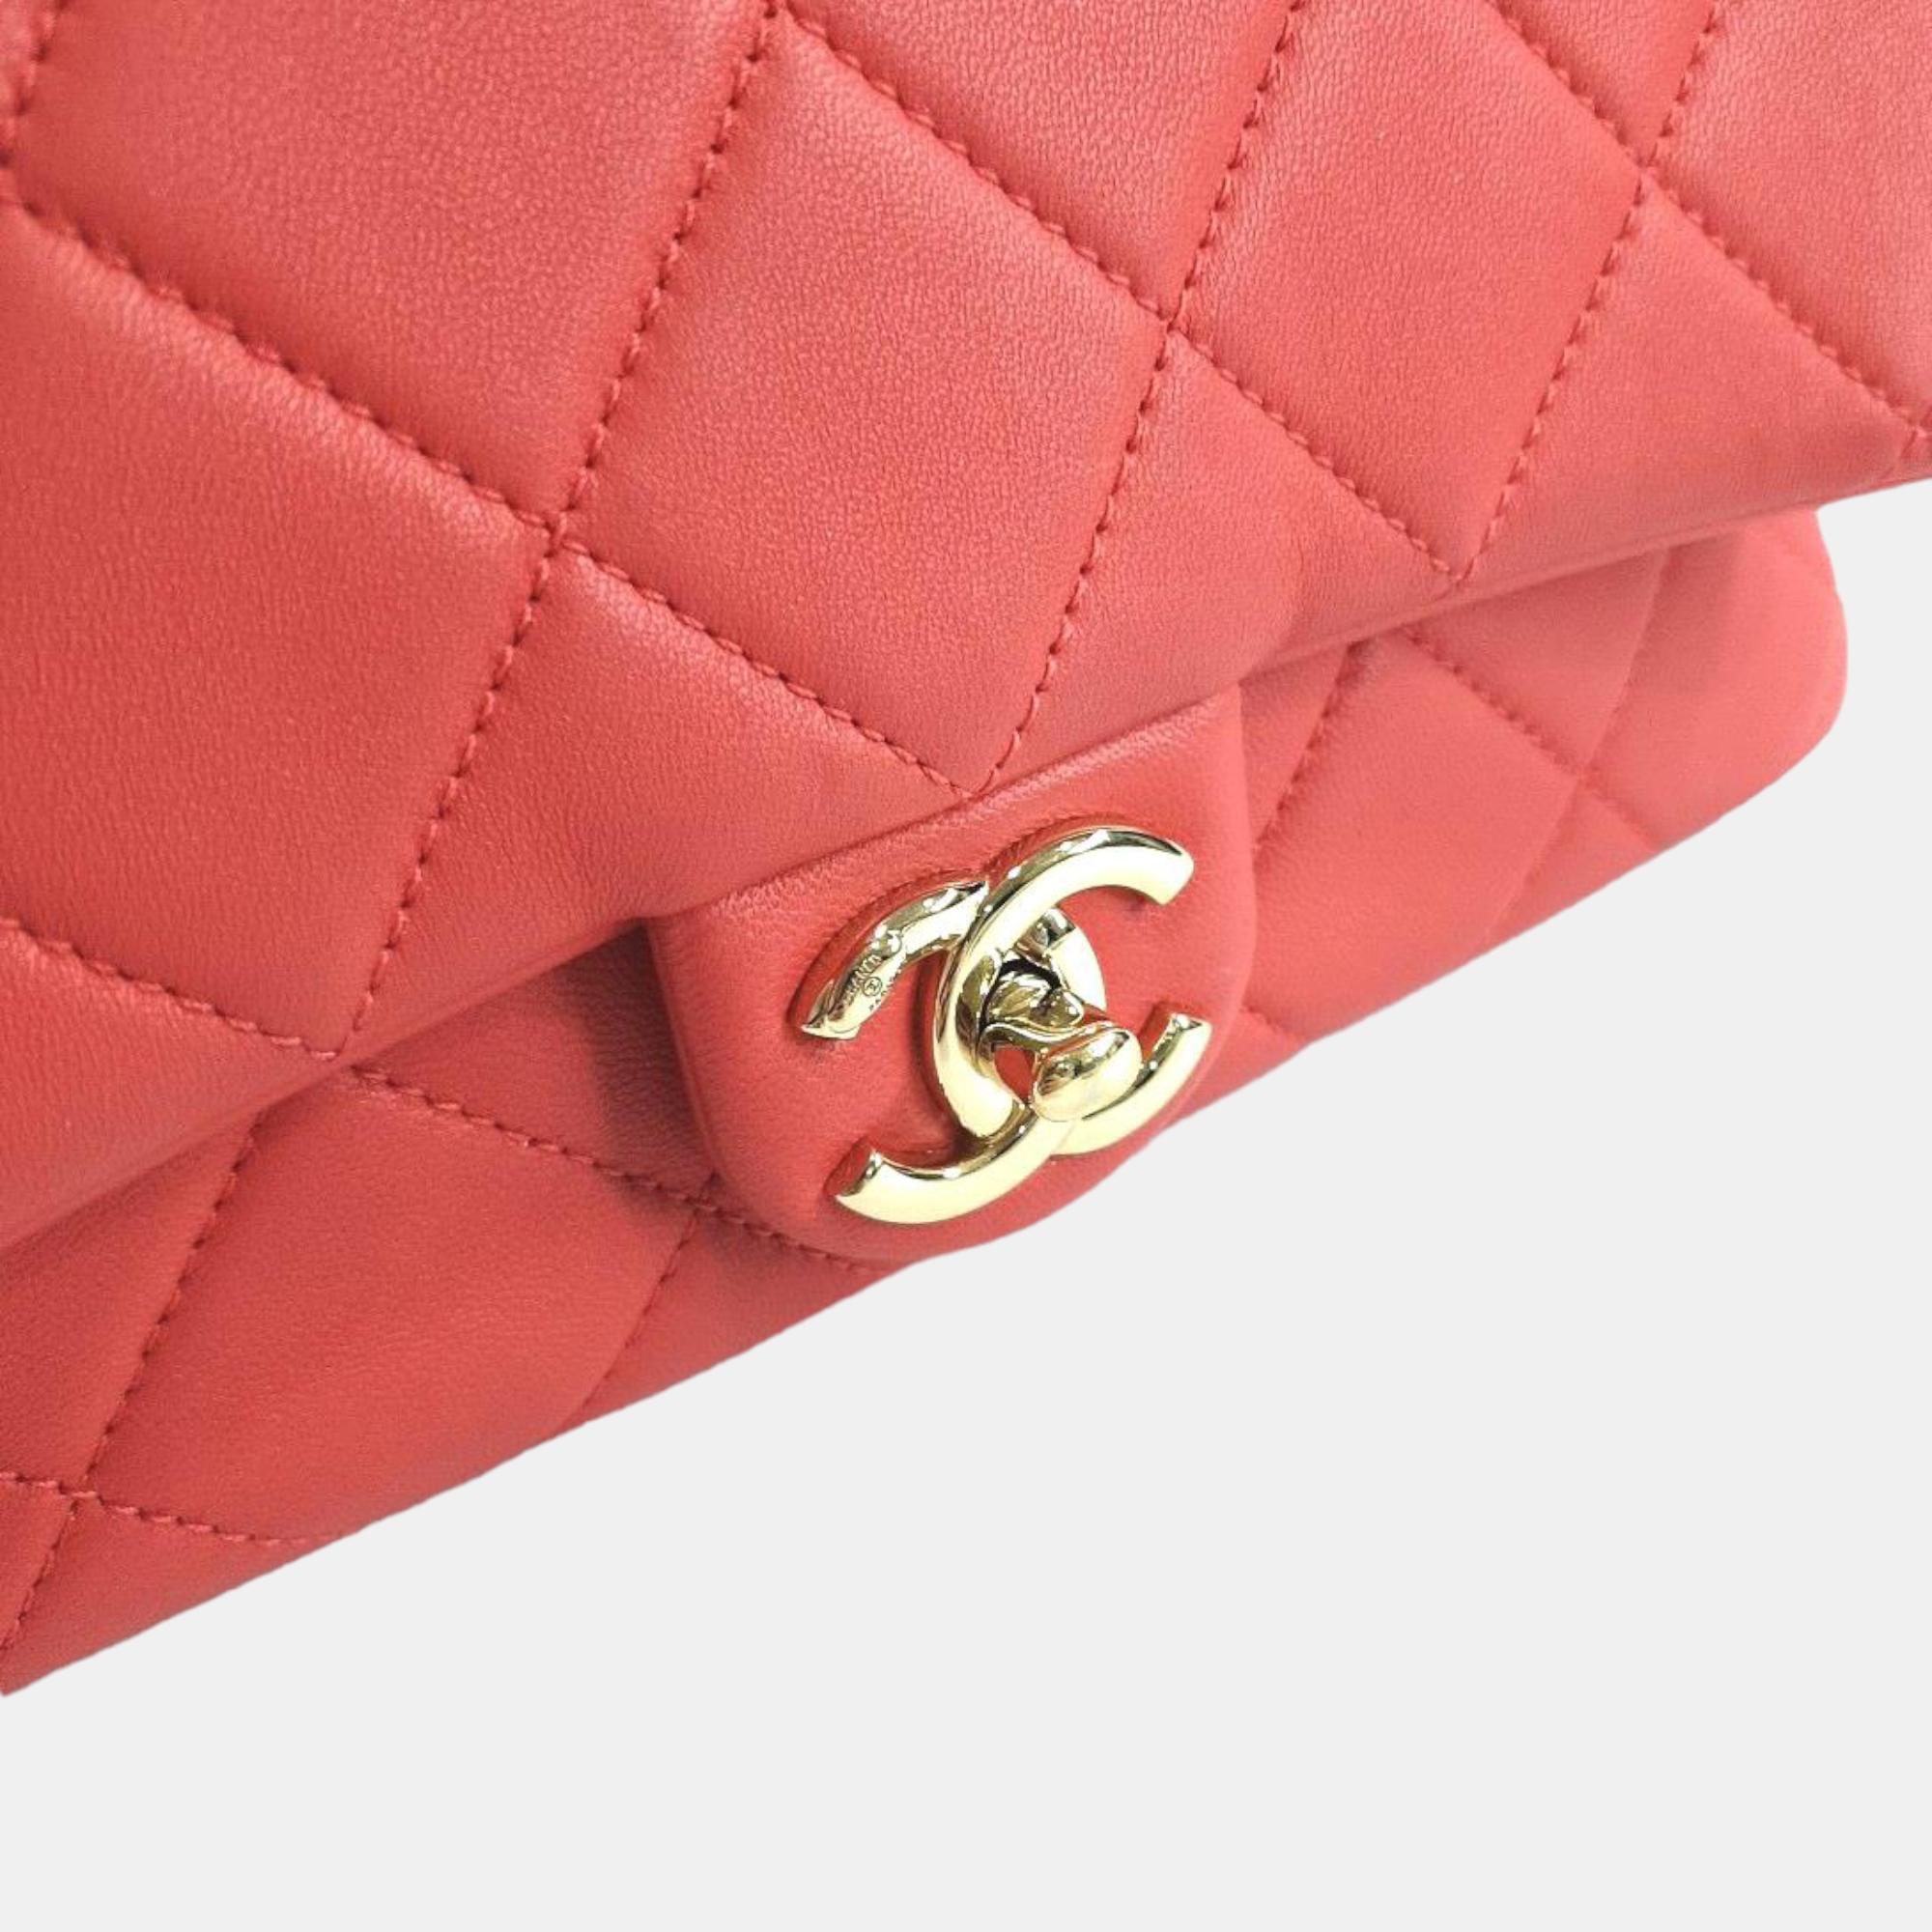 Chanel Red Leather Elegant Chain Flap Bag